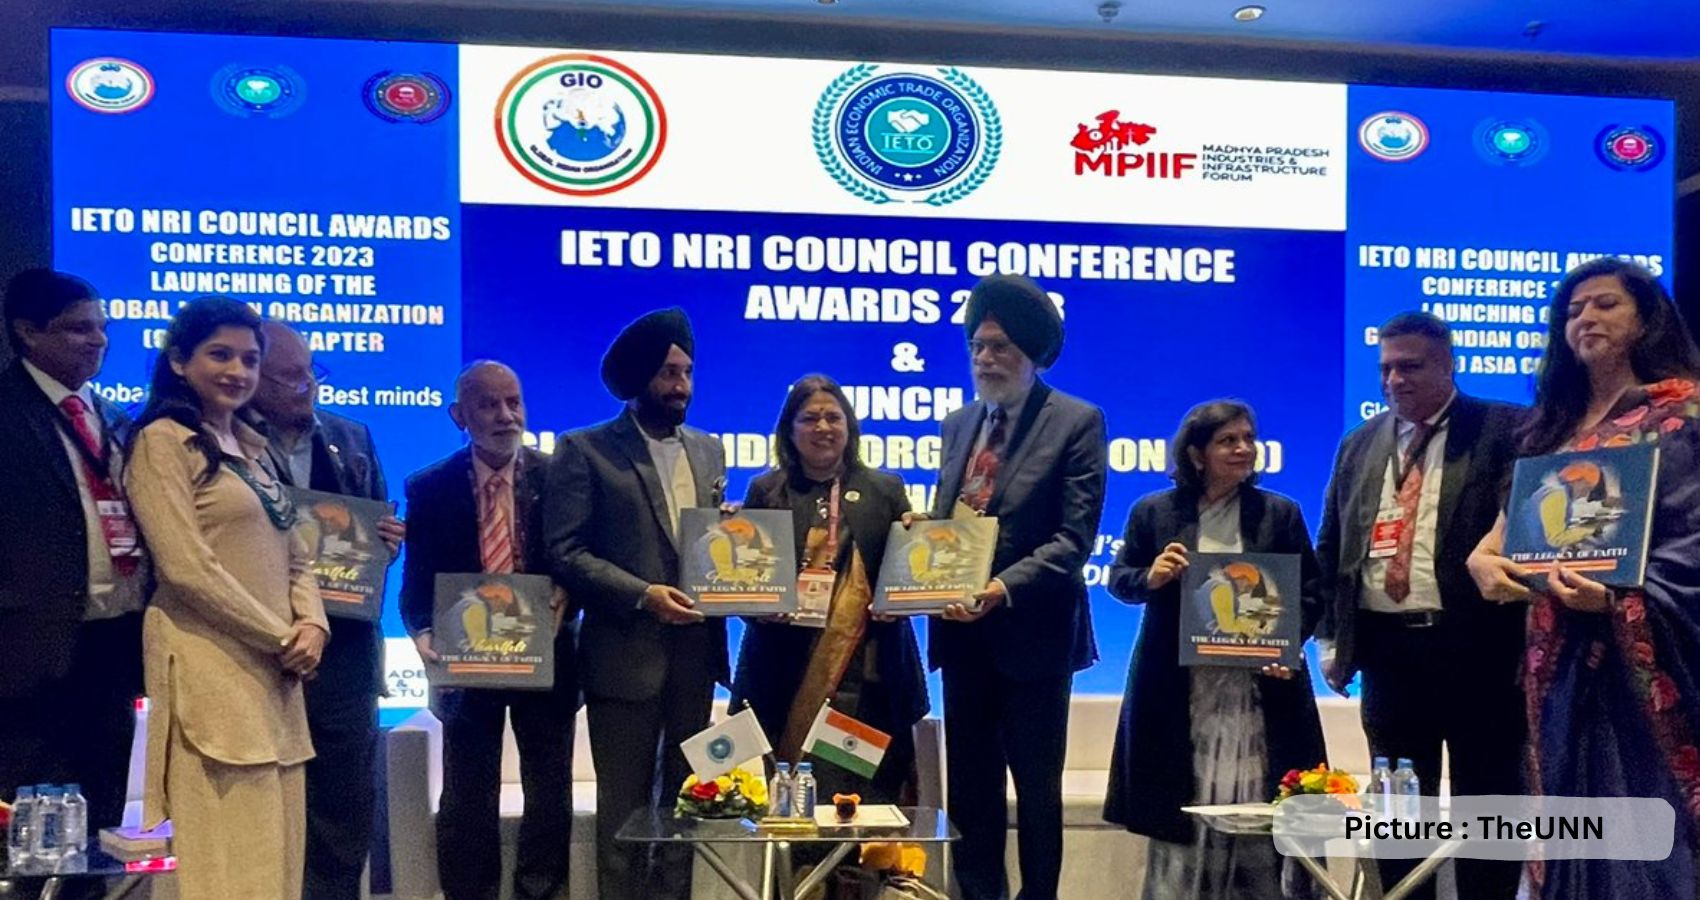 Global Indian Organization Asia Chapter Launched At NRI Council Conference In Indore